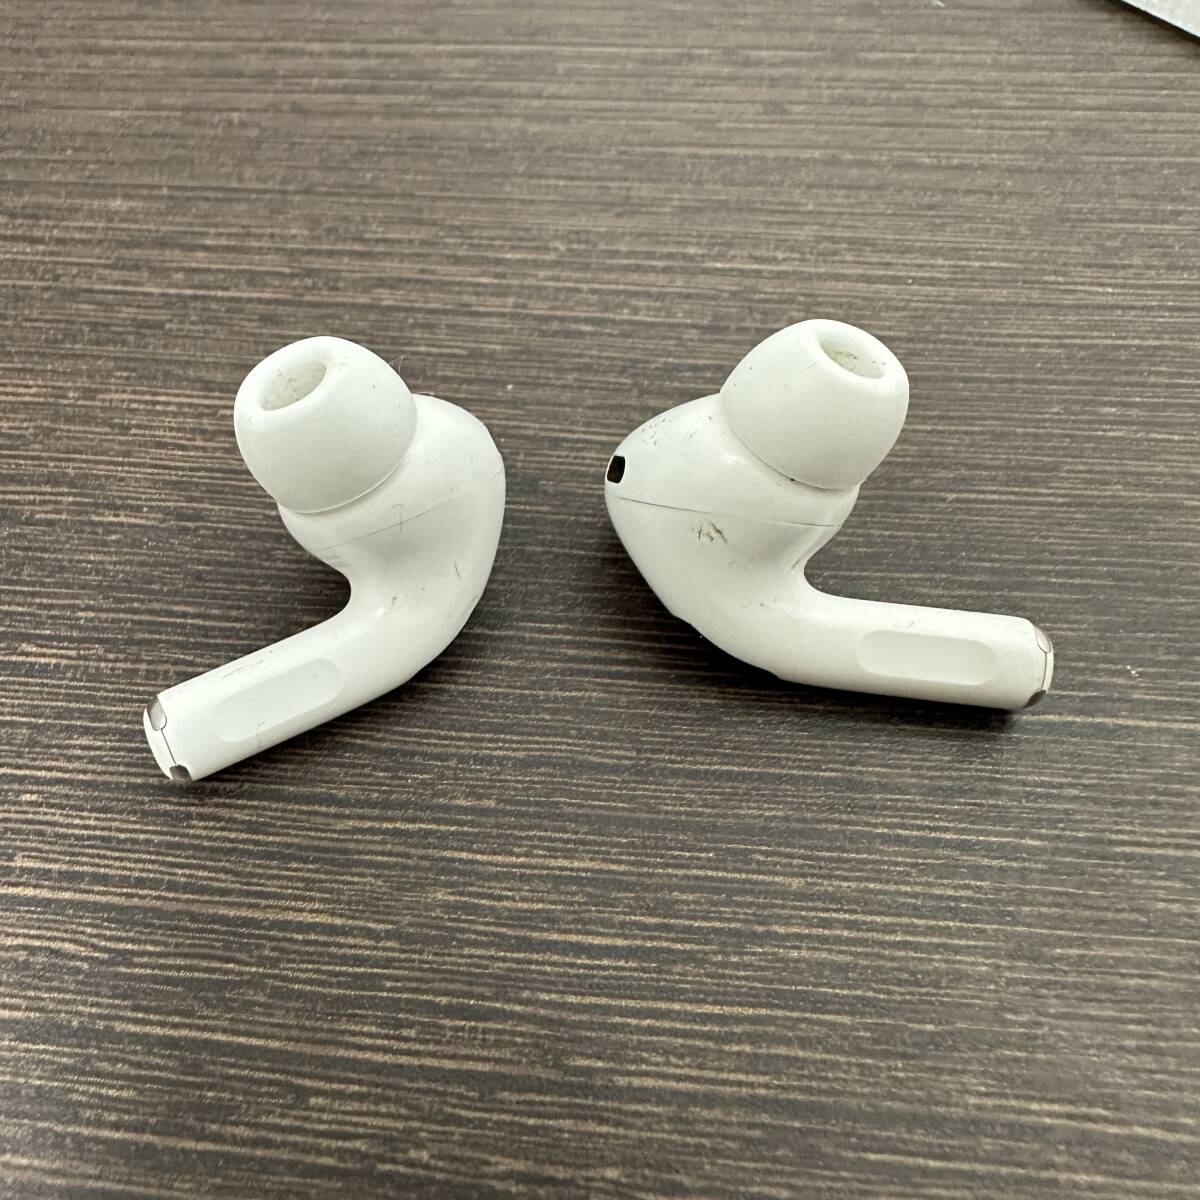 ☆★H1587【送料込み】Apple AirPods Pro MQD83J/A A2700 A2698 A2699 第2世代 AirPods Pro MagSafe 充電ケース ケーブル・箱付きの画像4